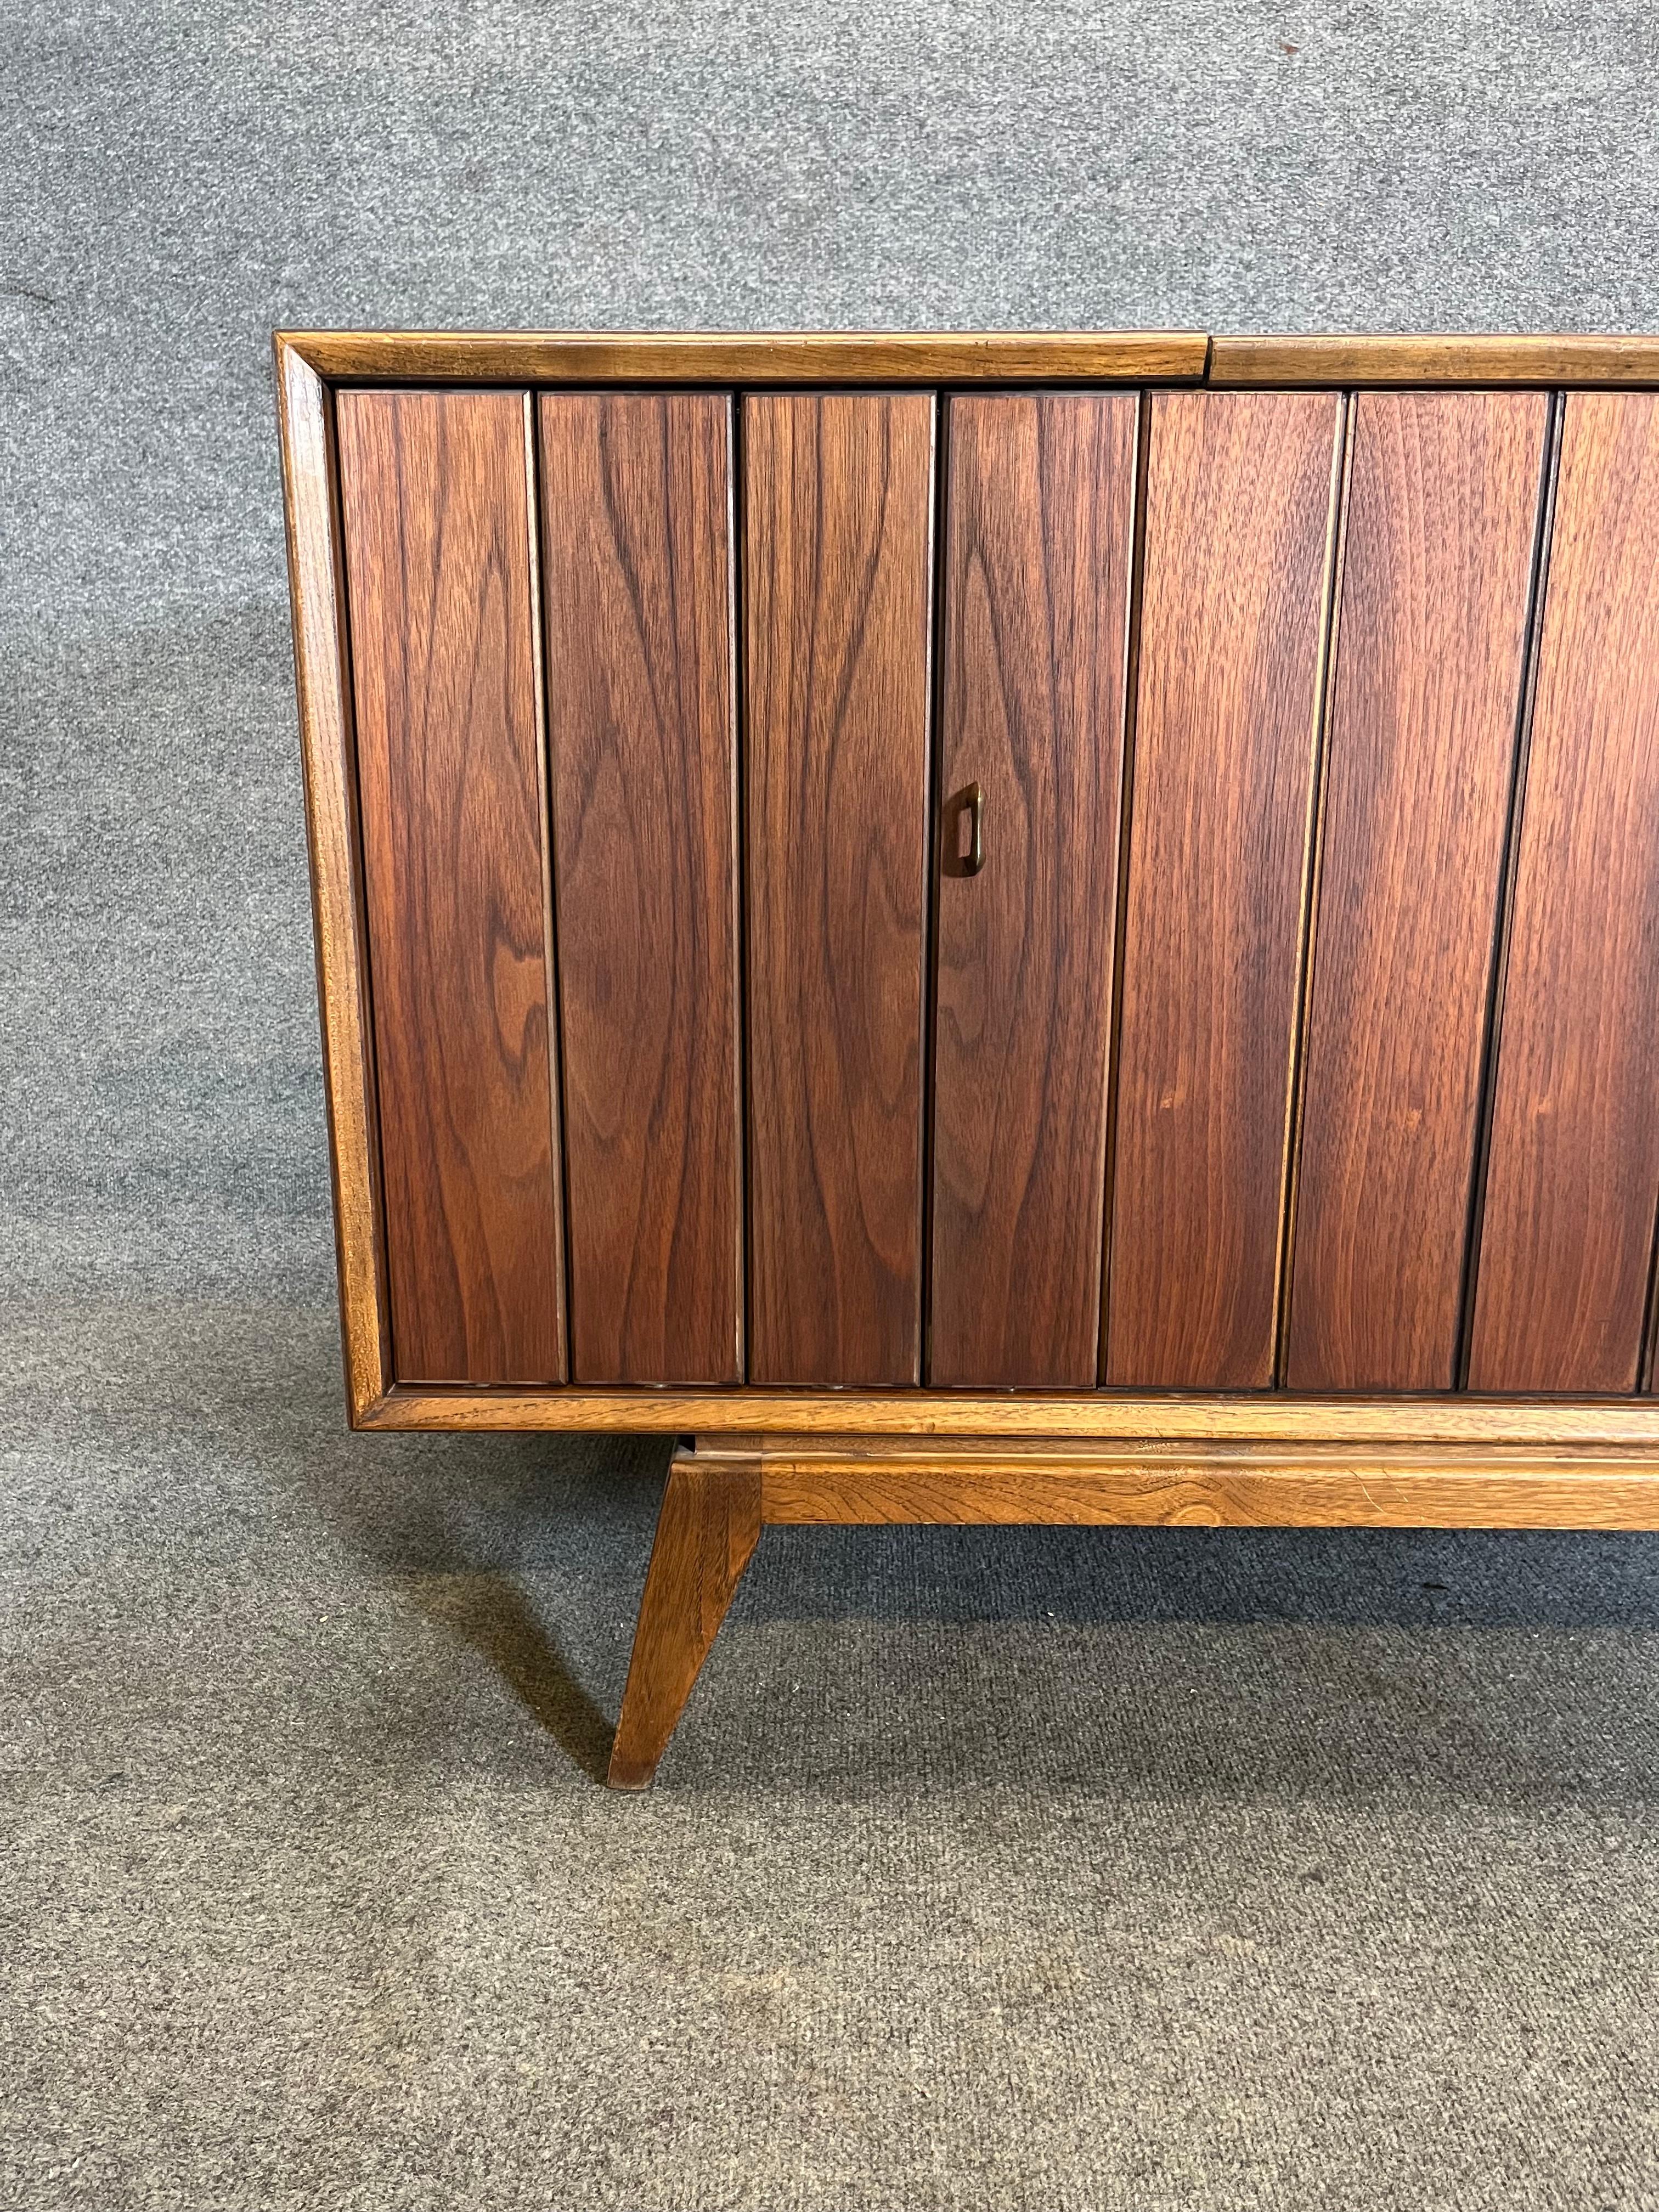 zenith record player cabinet value